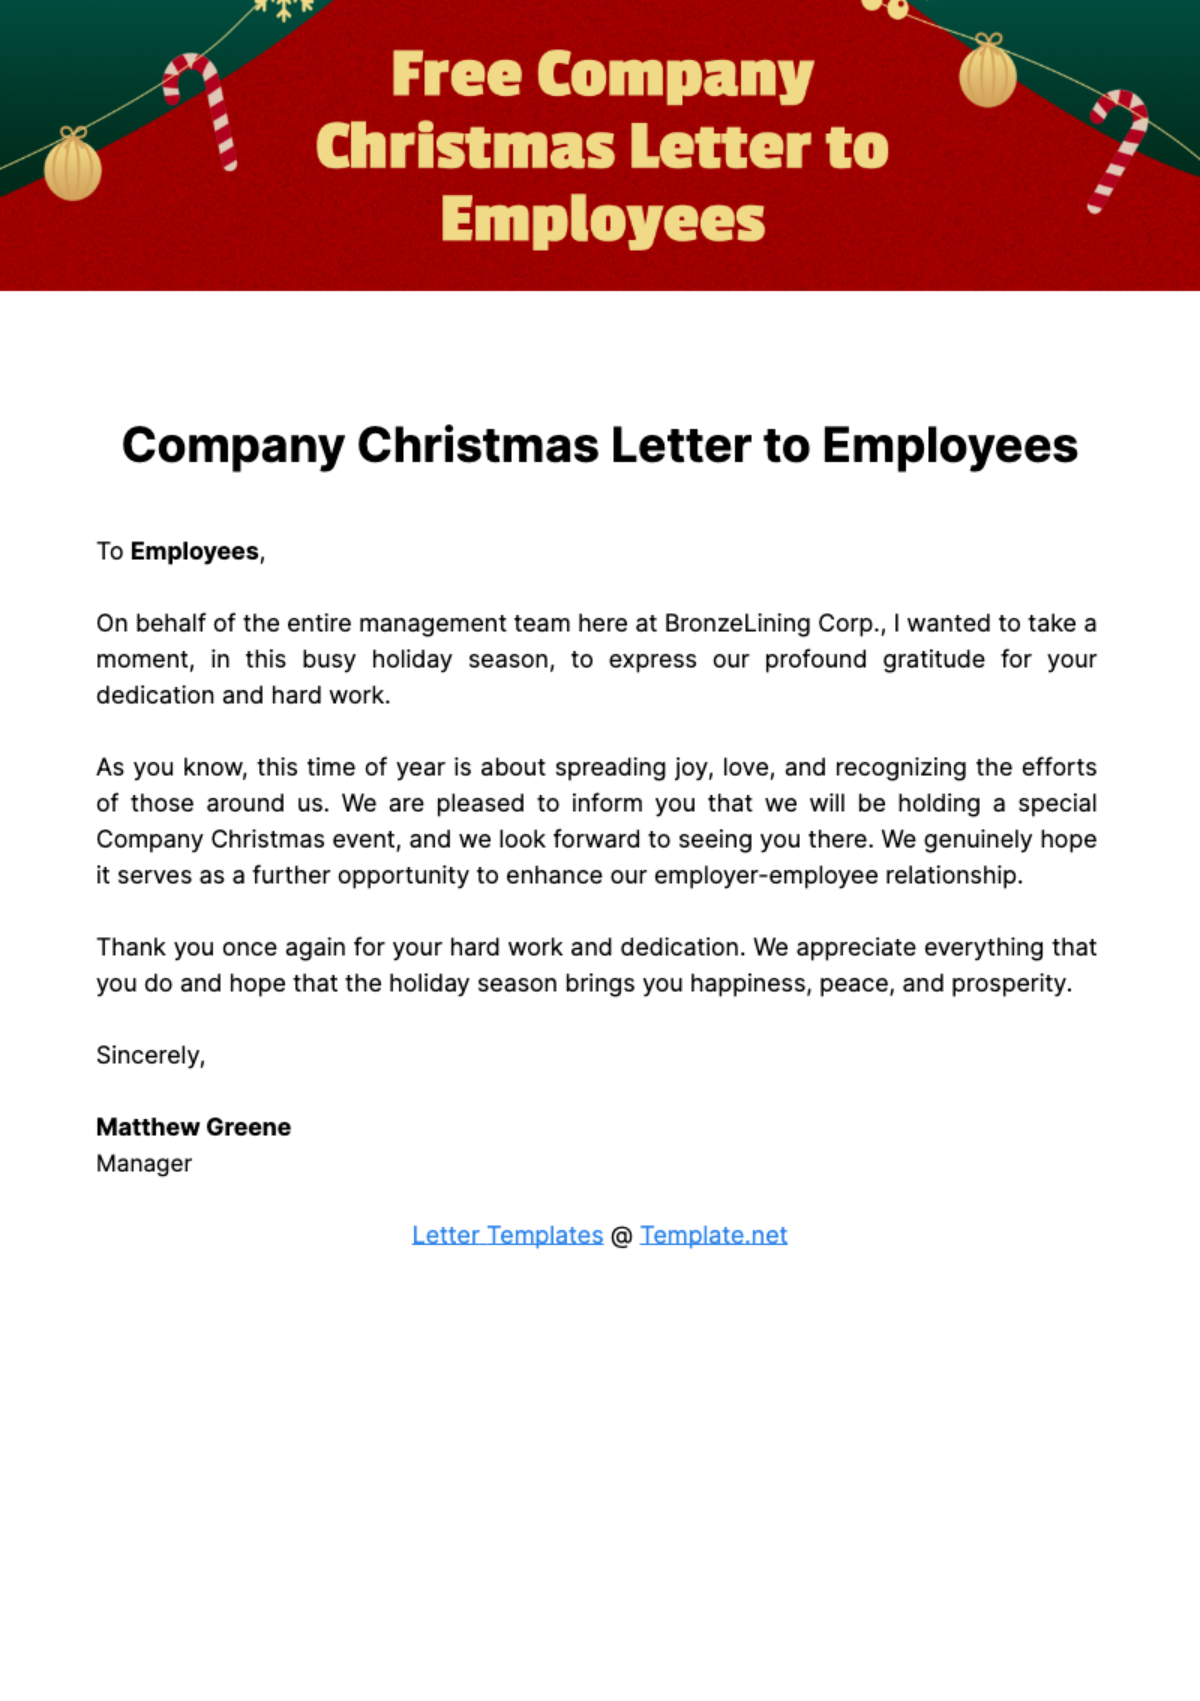 Free Company Christmas Letter to Employees Template